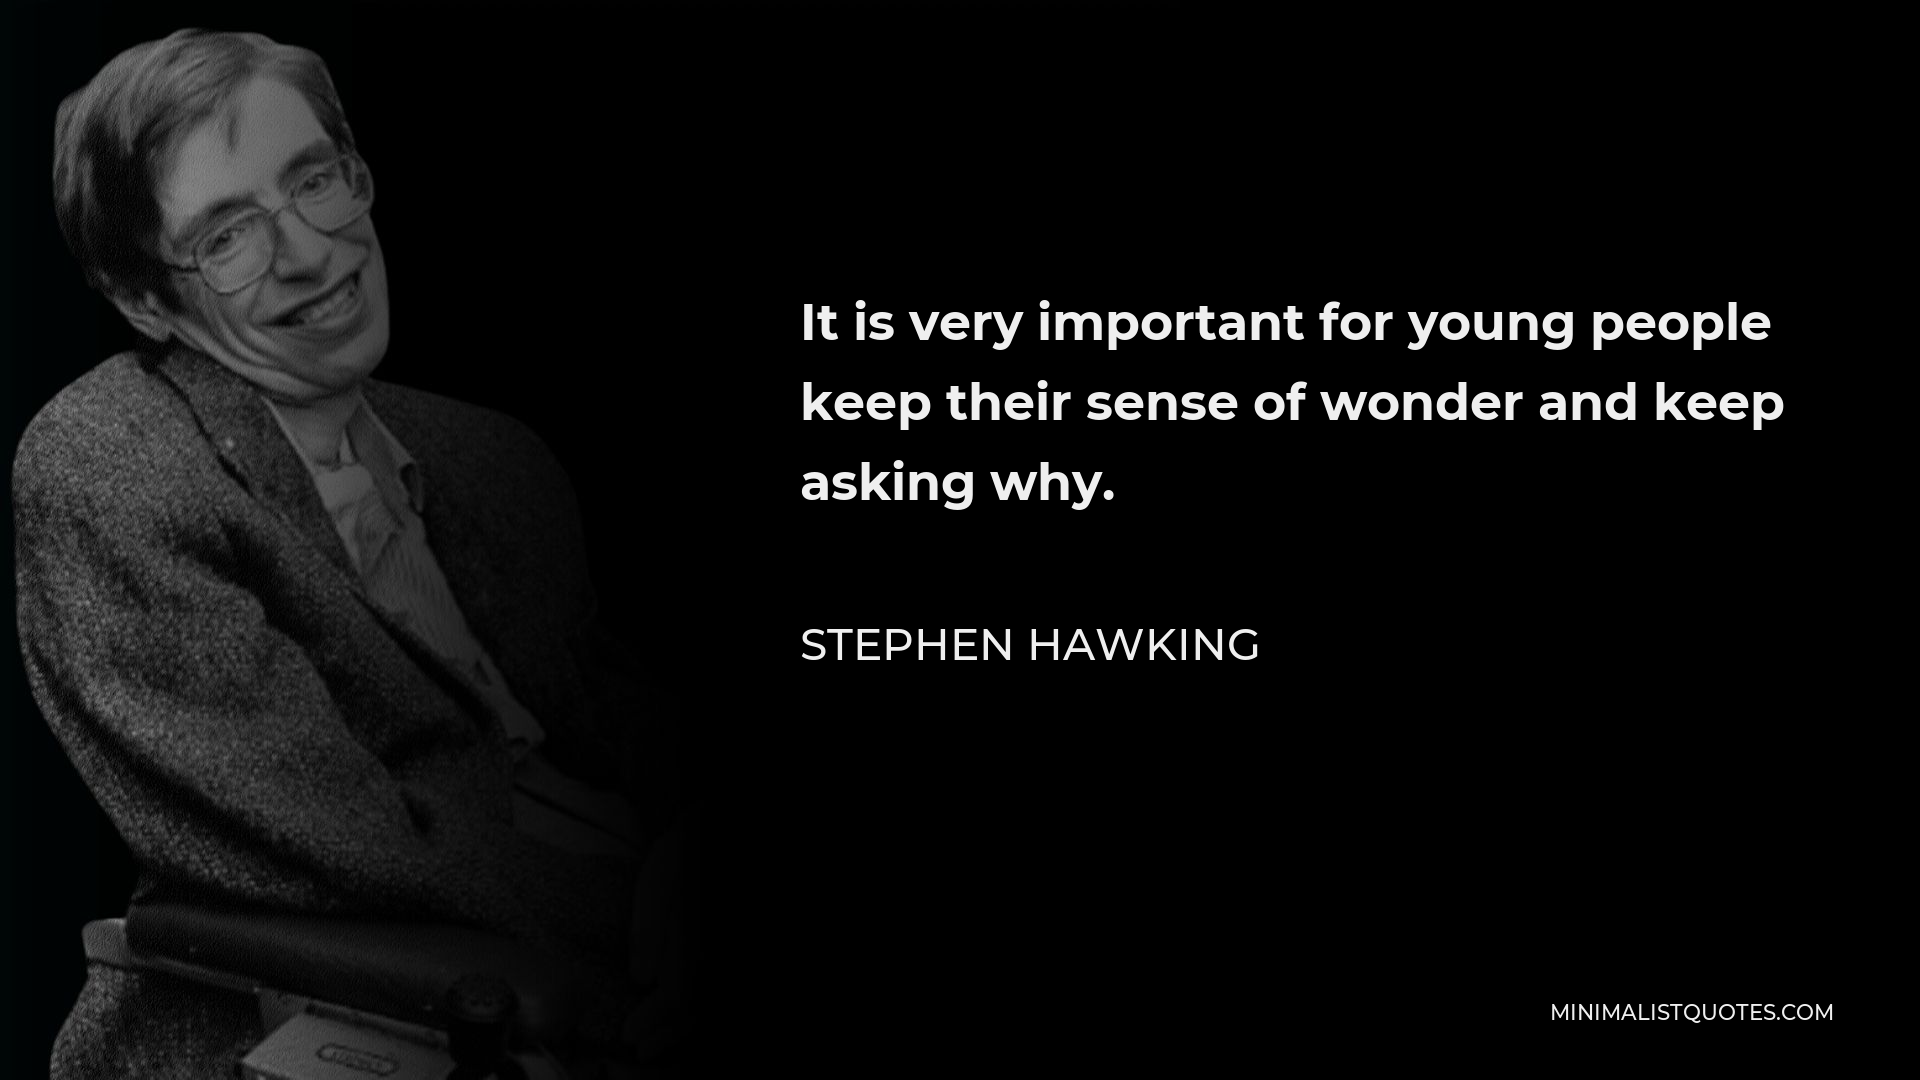 Stephen Hawking Quote - It is very important for young people keep their sense of wonder and keep asking why.